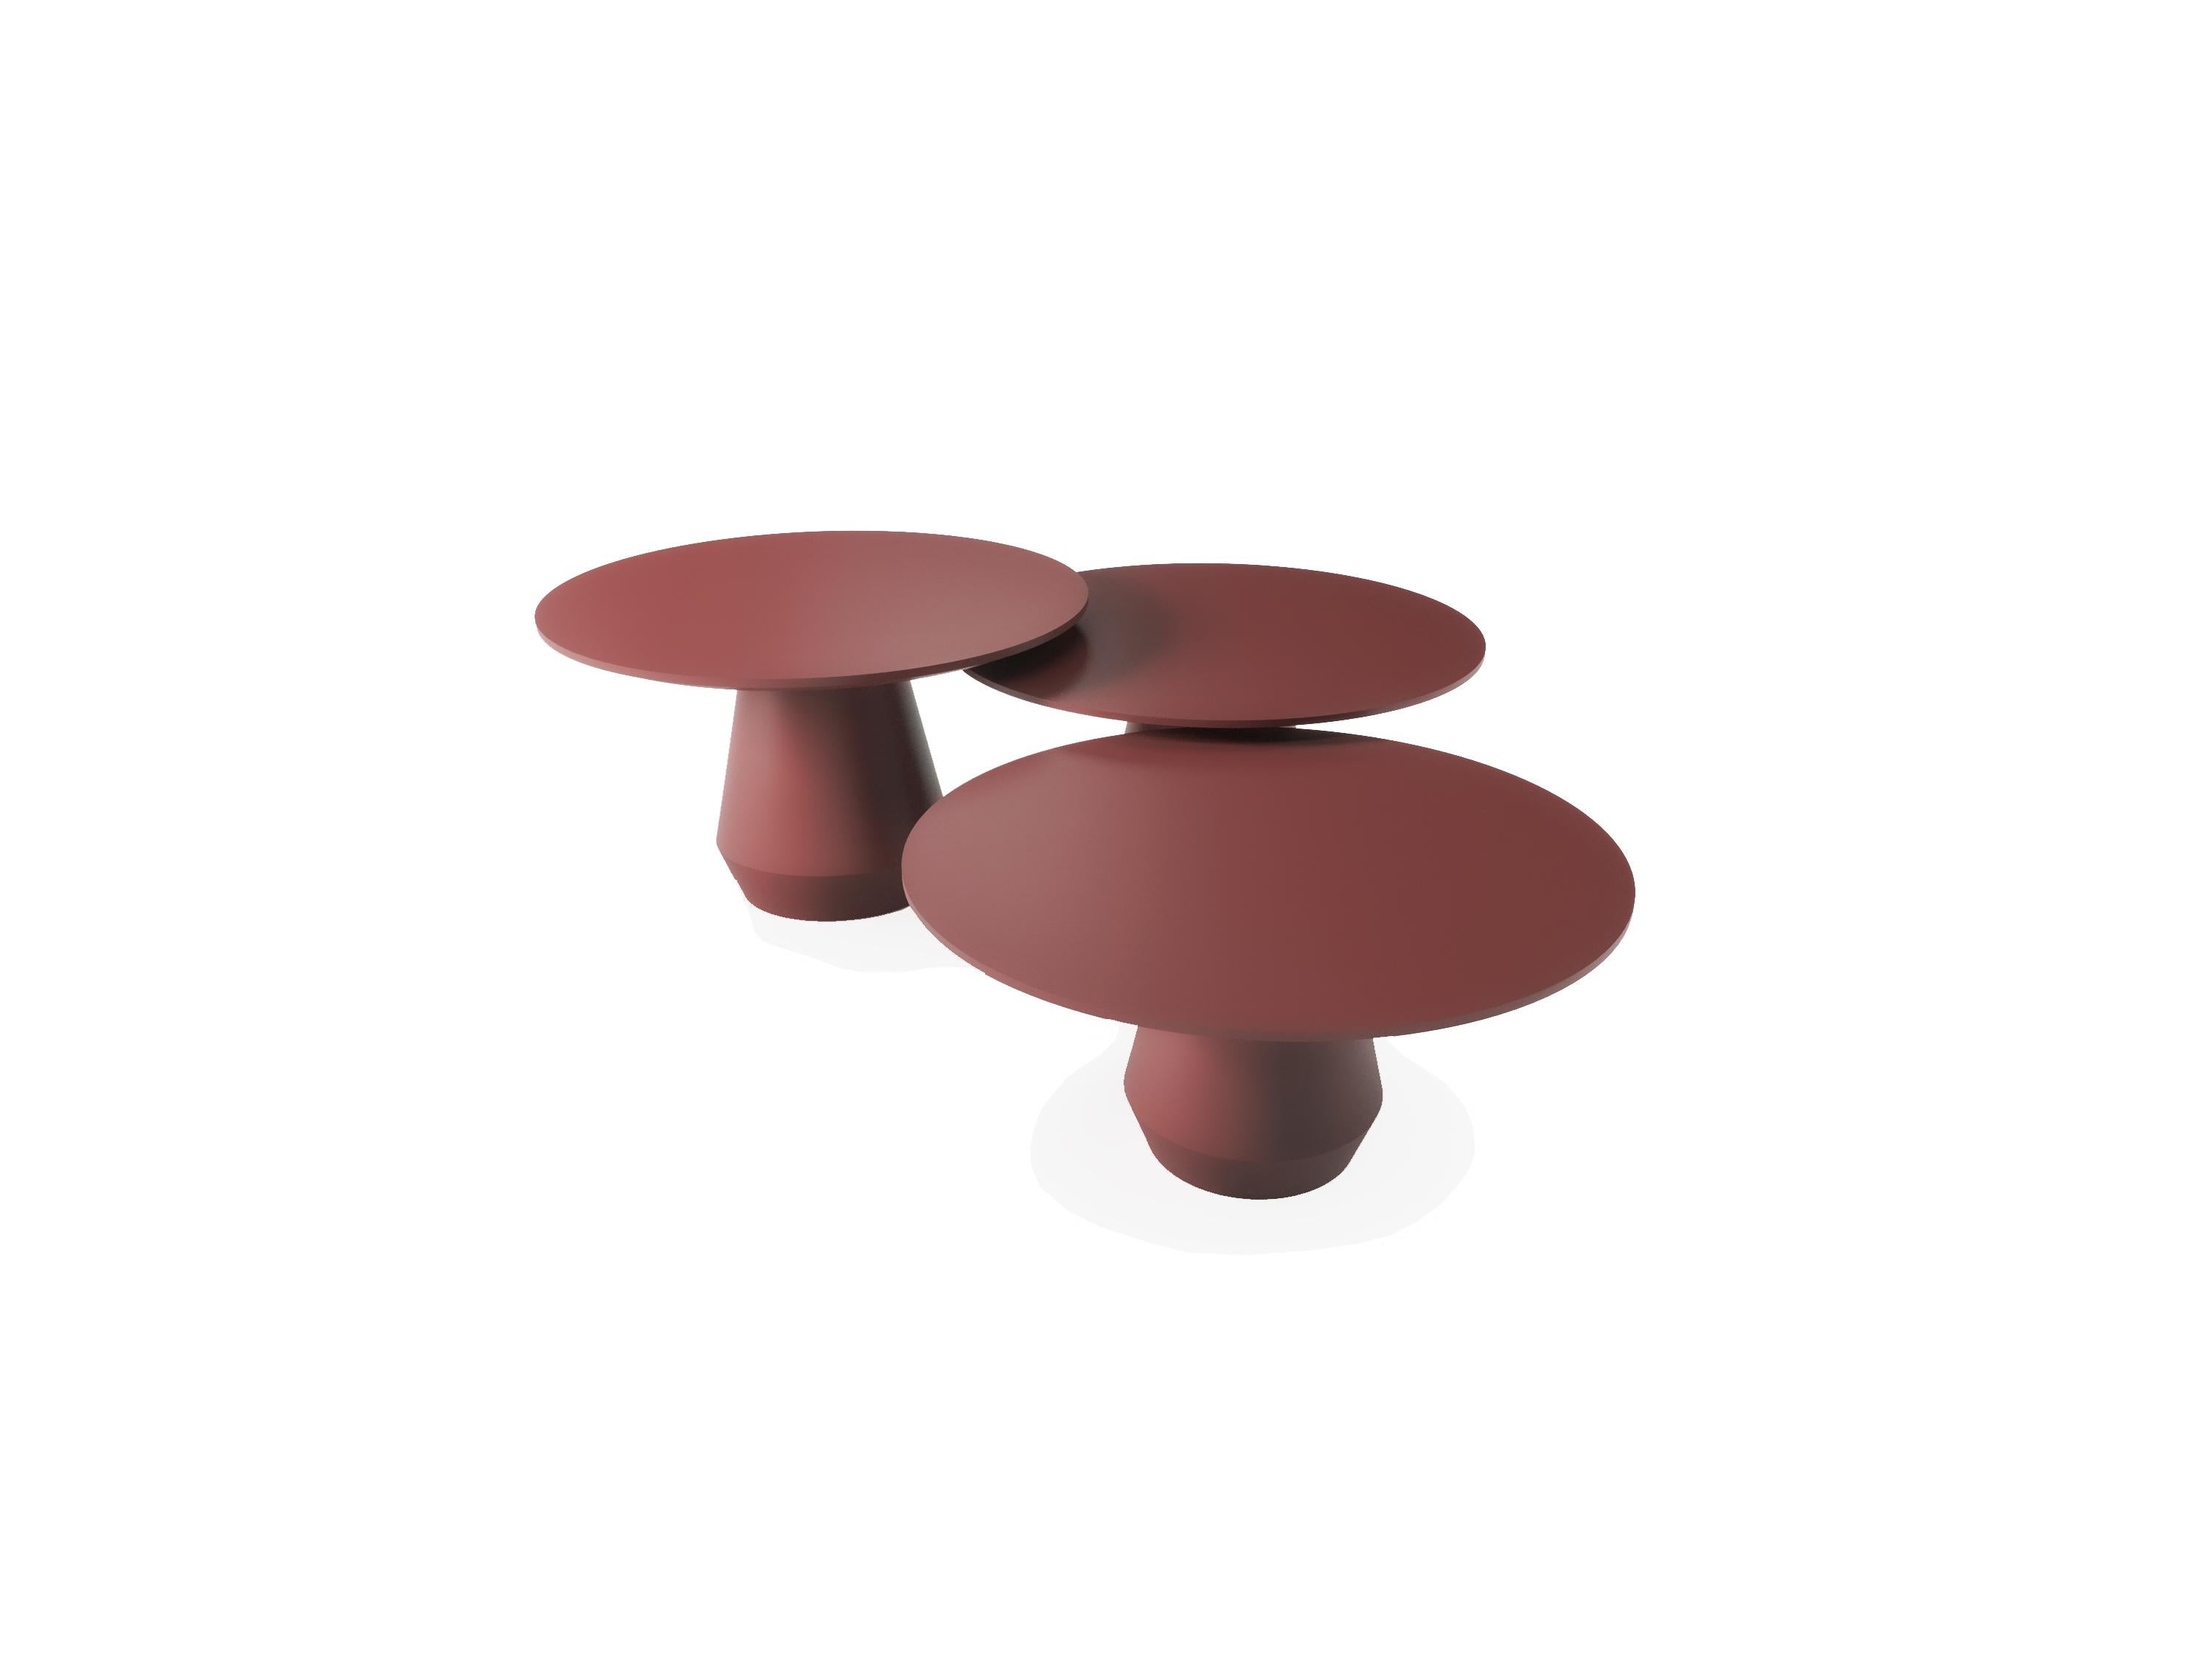 About Charlotte Triple Center Table

The slender legs of wood and metal, the beautiful crossing details and a contrasting solid wood top, provides a large combination of materials in these side tables. They come in two heights, multiplying its